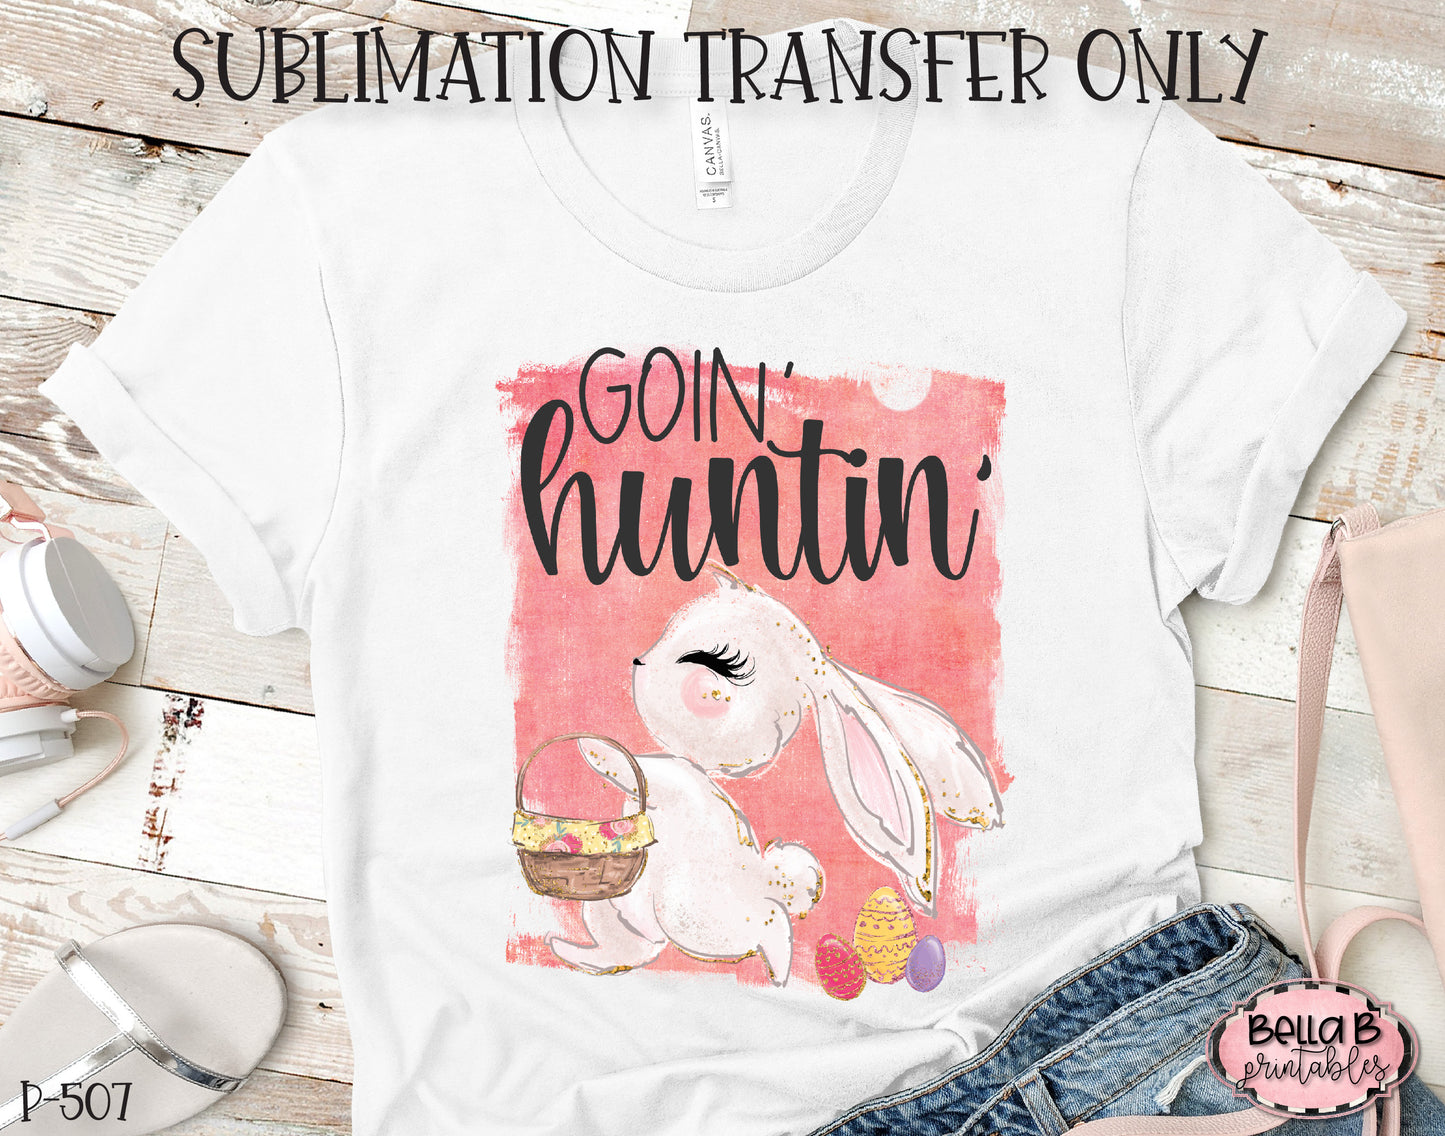 Easter Sublimation Transfer, Goin' Huntin Ready To Press, Heat Press Transfer, Sublimation Print